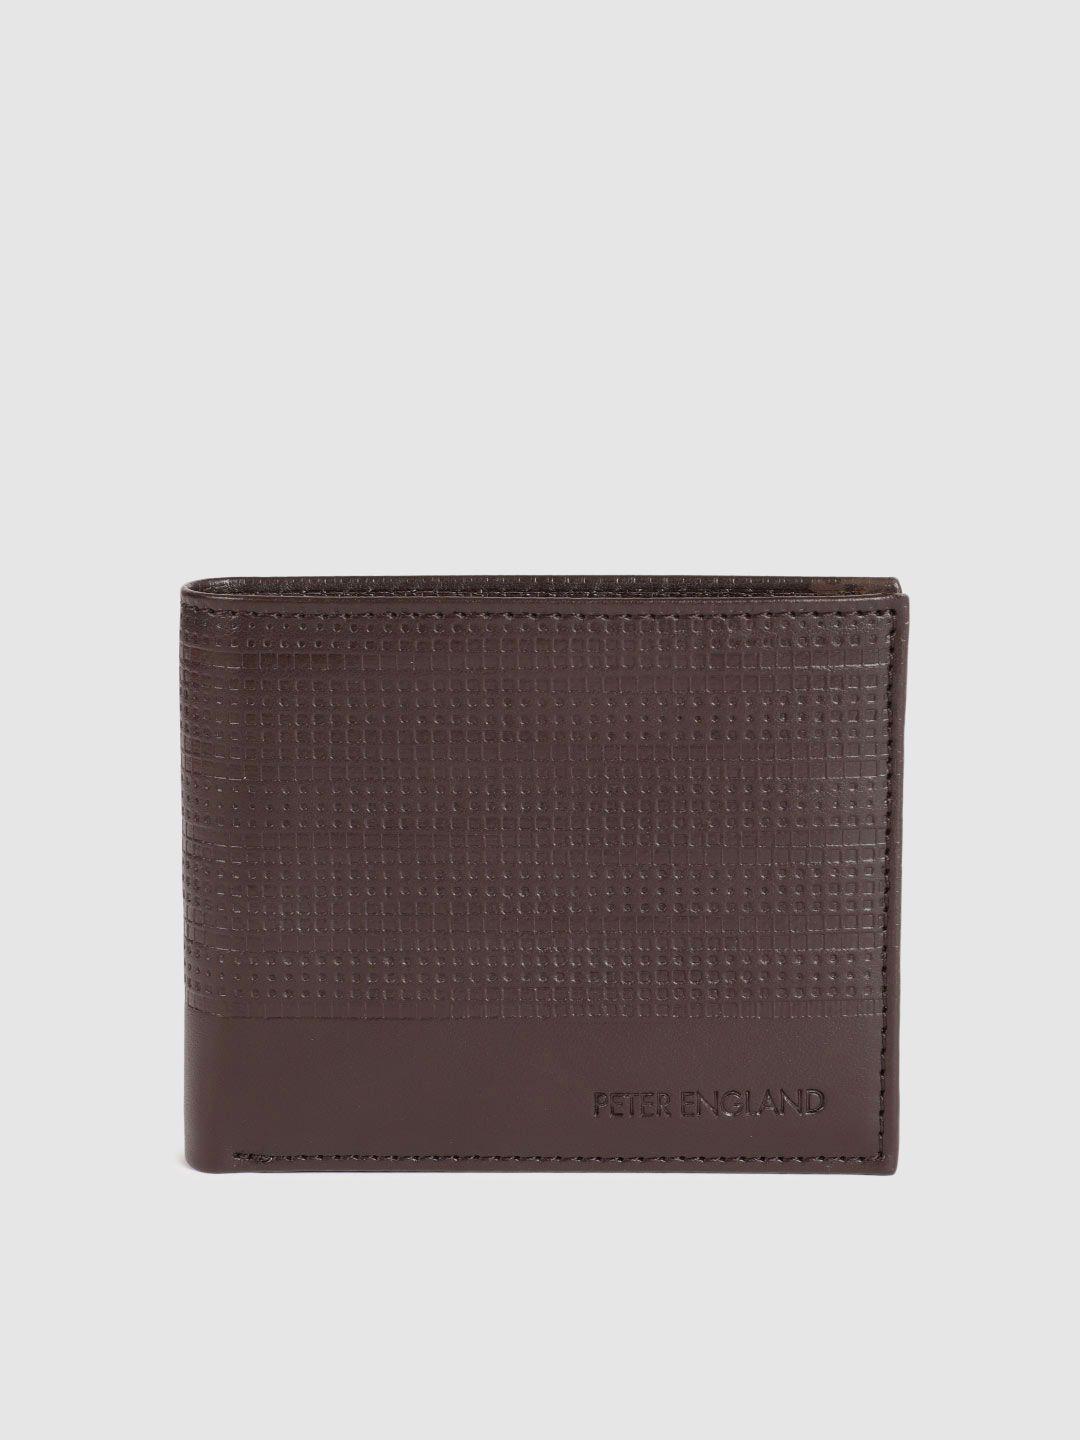 peter england men brown textured leather two fold wallet